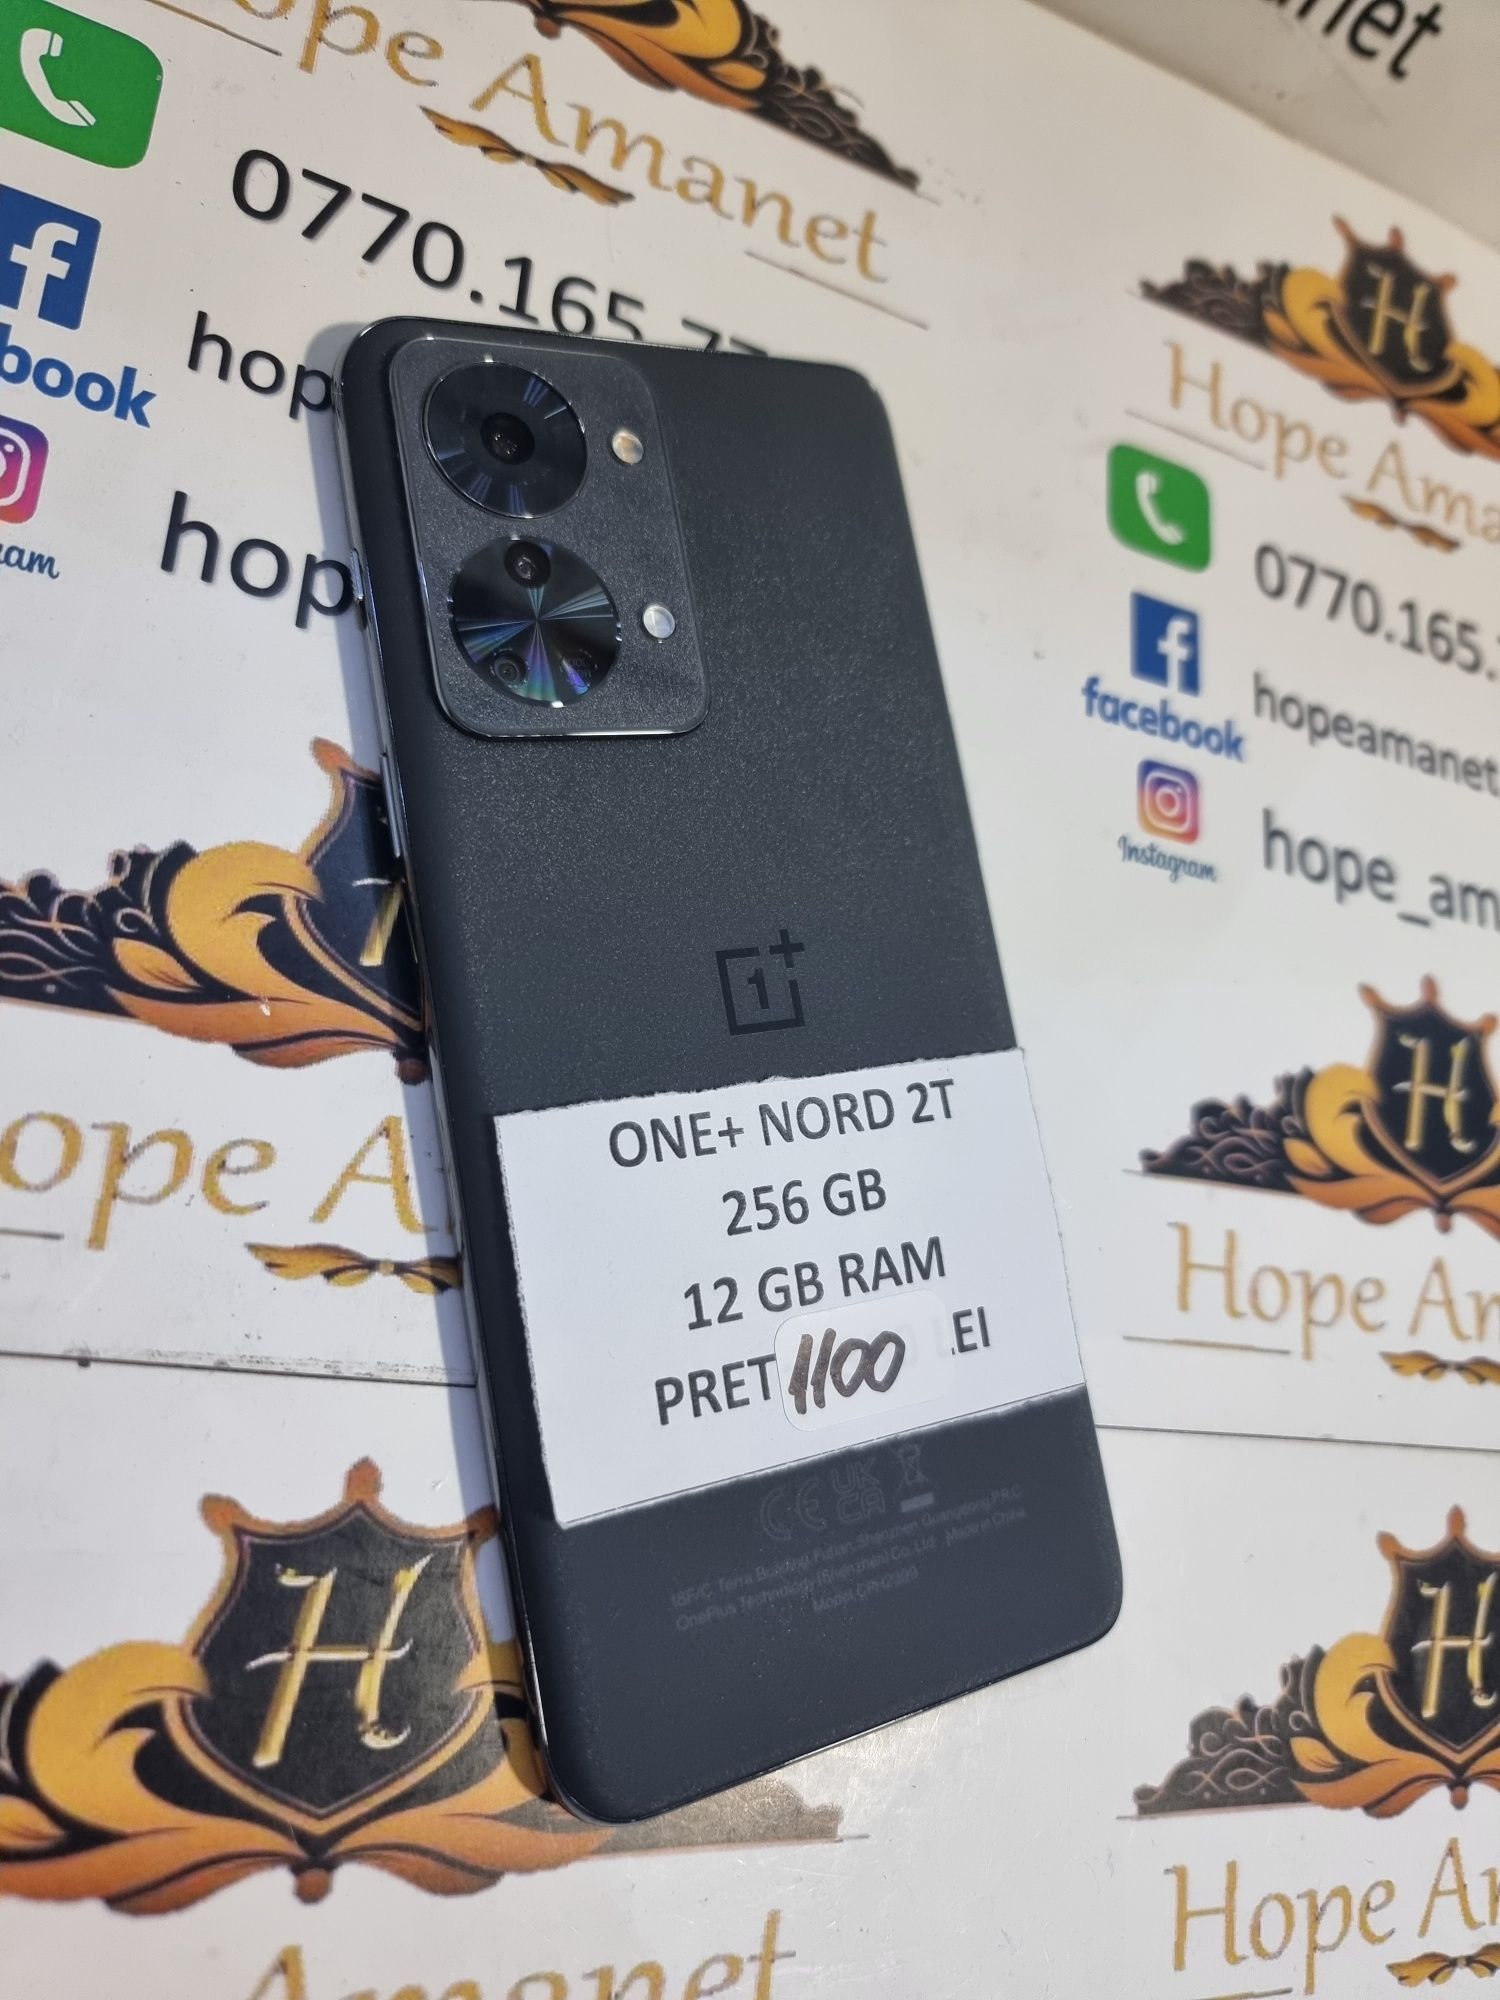 Hope Amanet P6 One Plus Nord 2T 256 gb